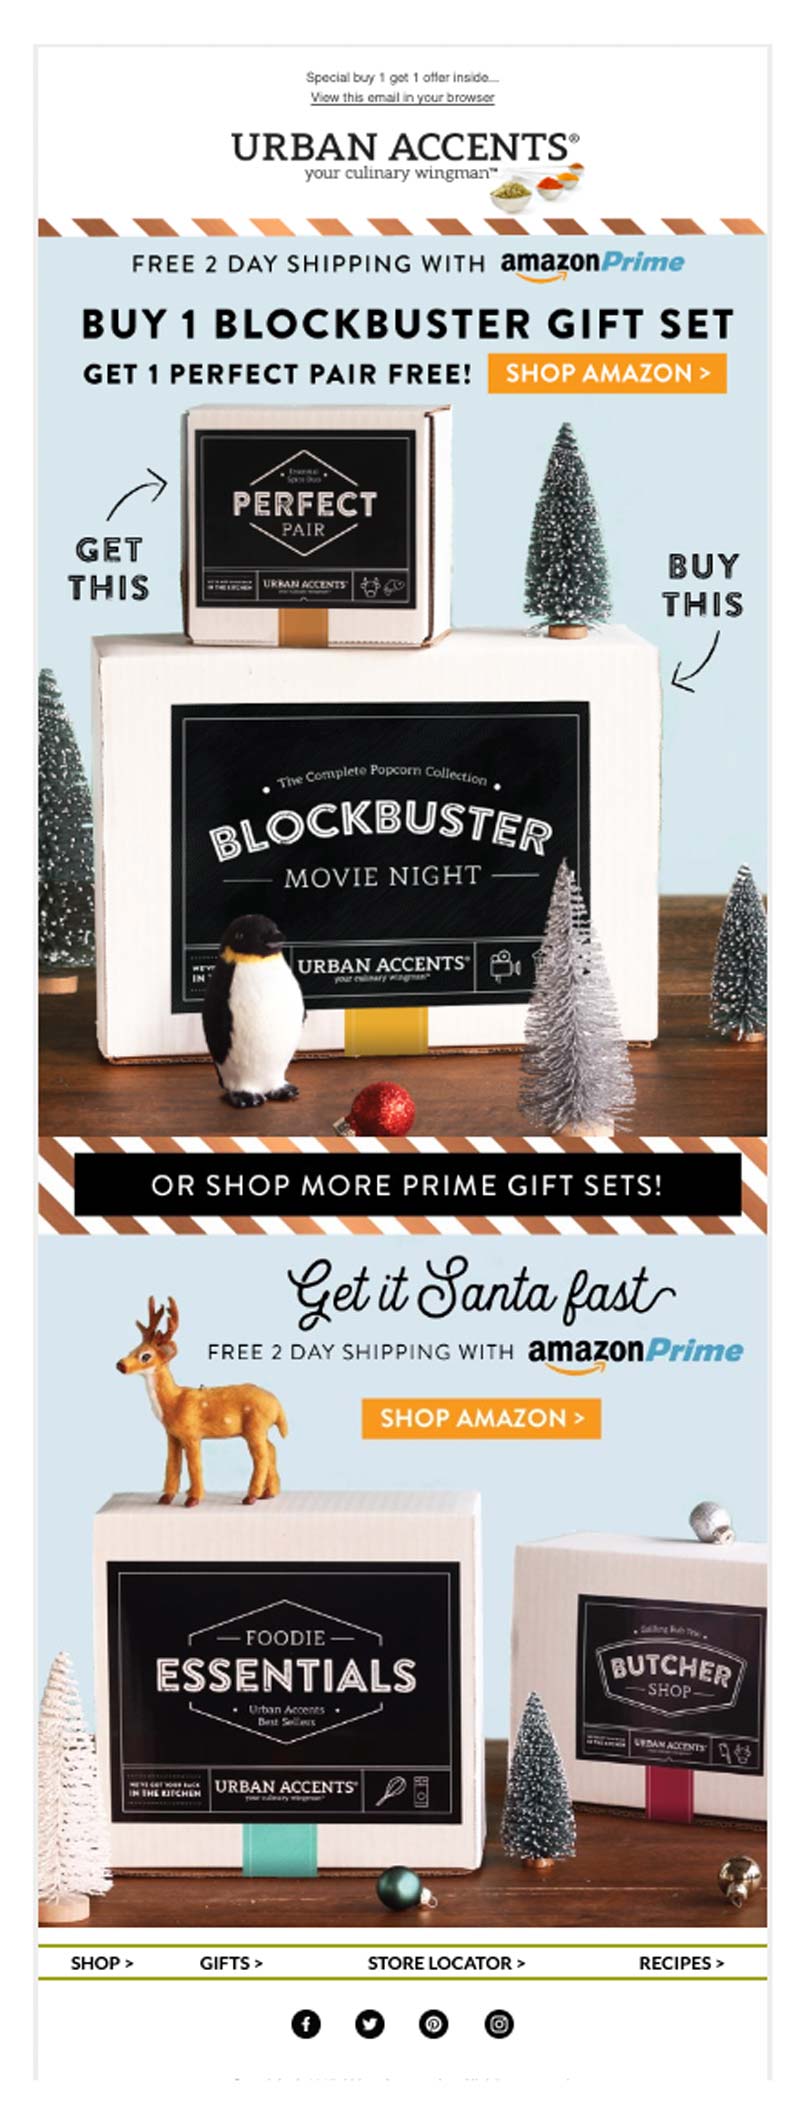 This email campaign had the witty subject line "Procrastinators - Amazon to the rescue!" to help customers discern deadlines for last orders.
